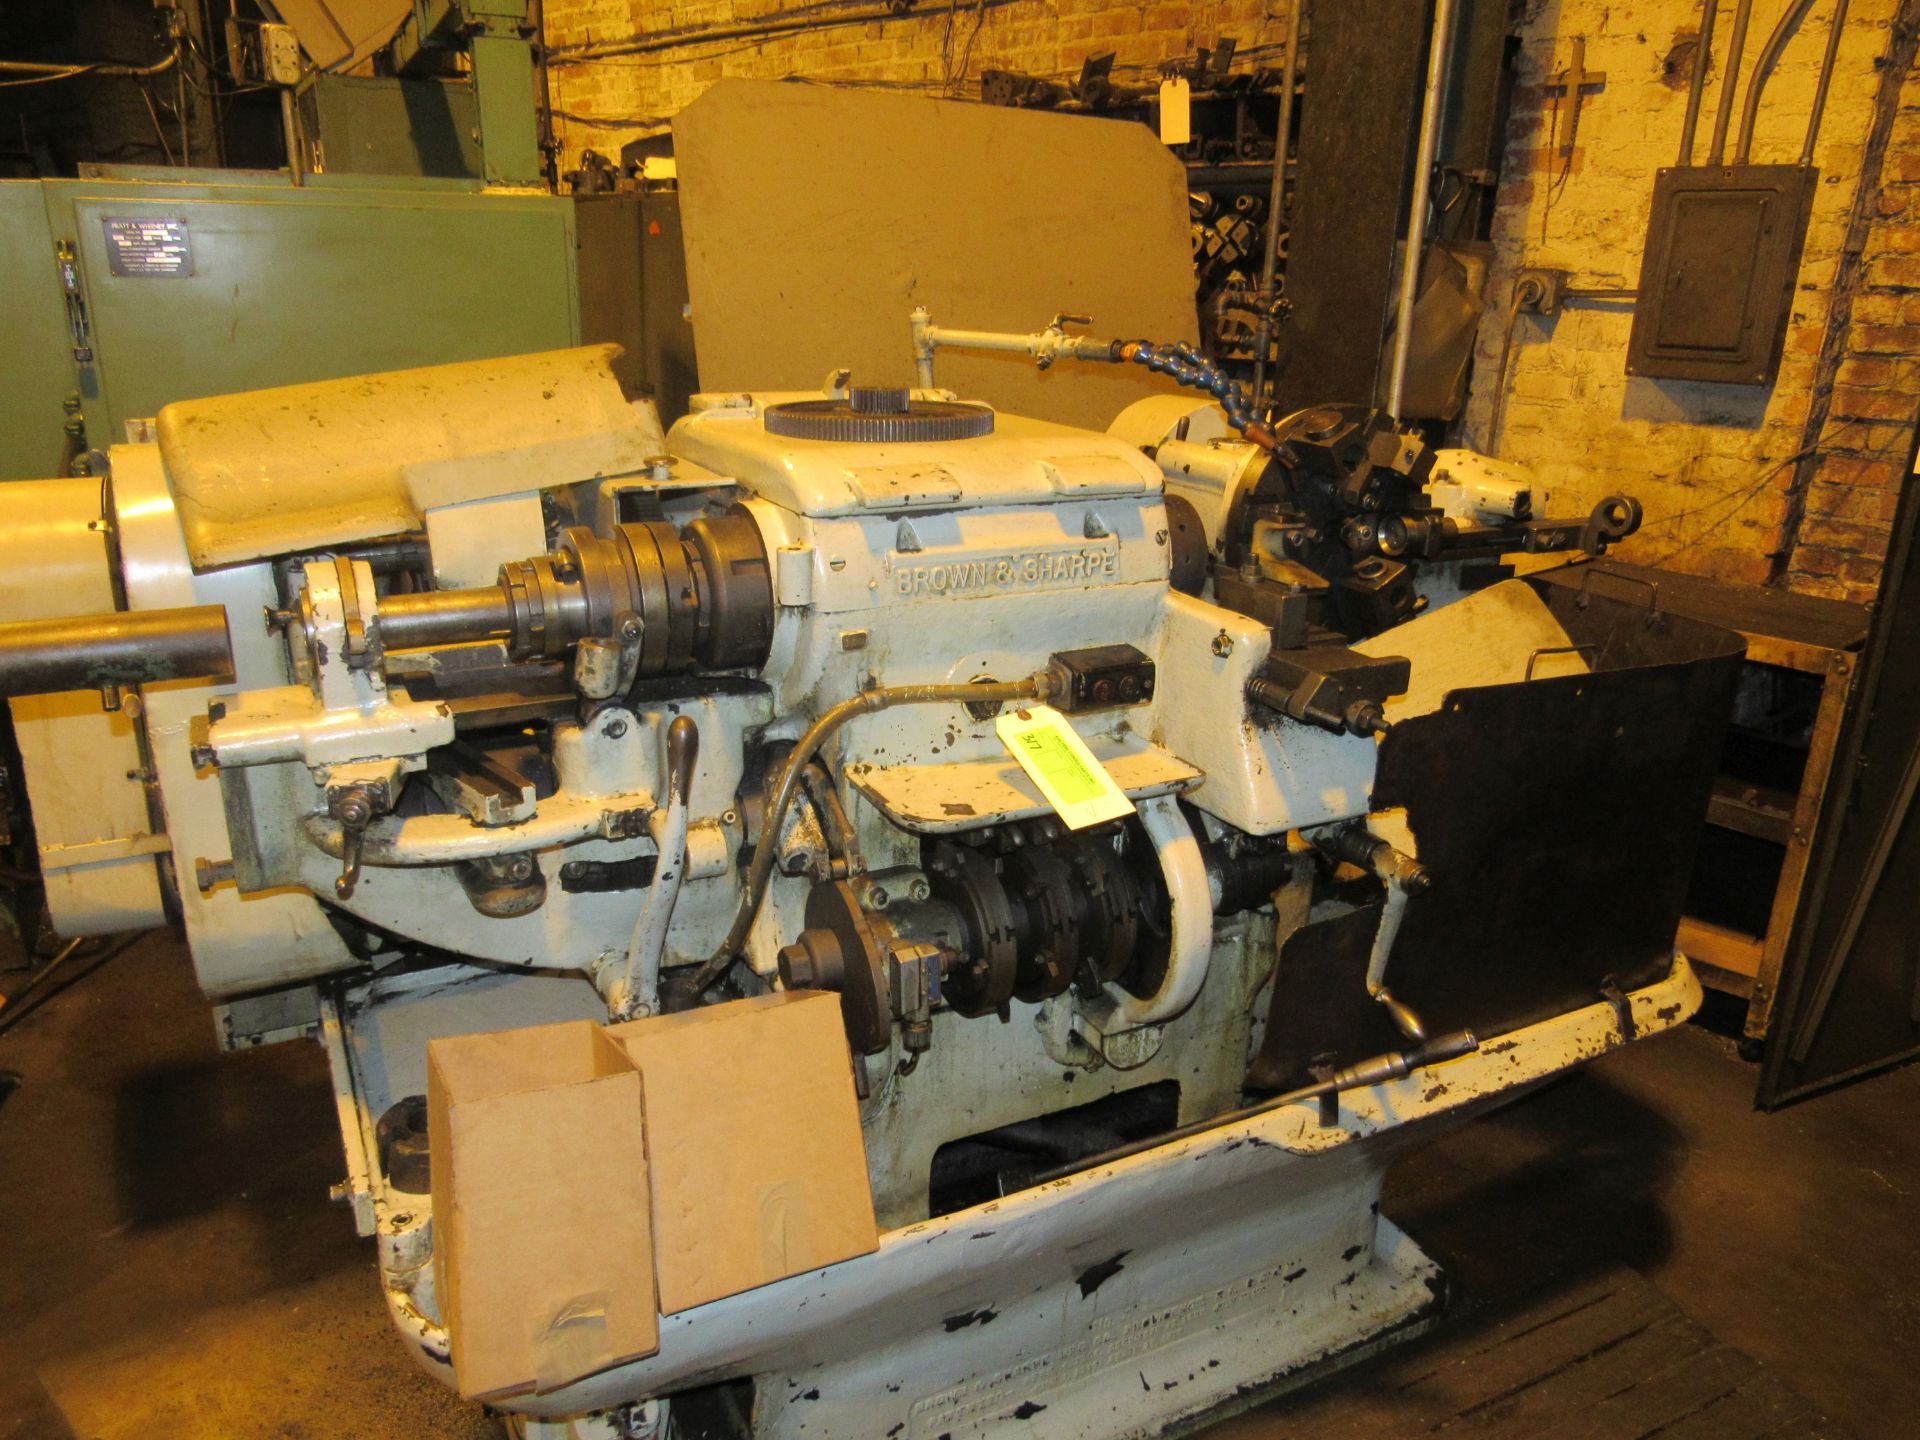 Brown and Sharpe model 4 turret lathe with vertical turret, bar feed and steady rests